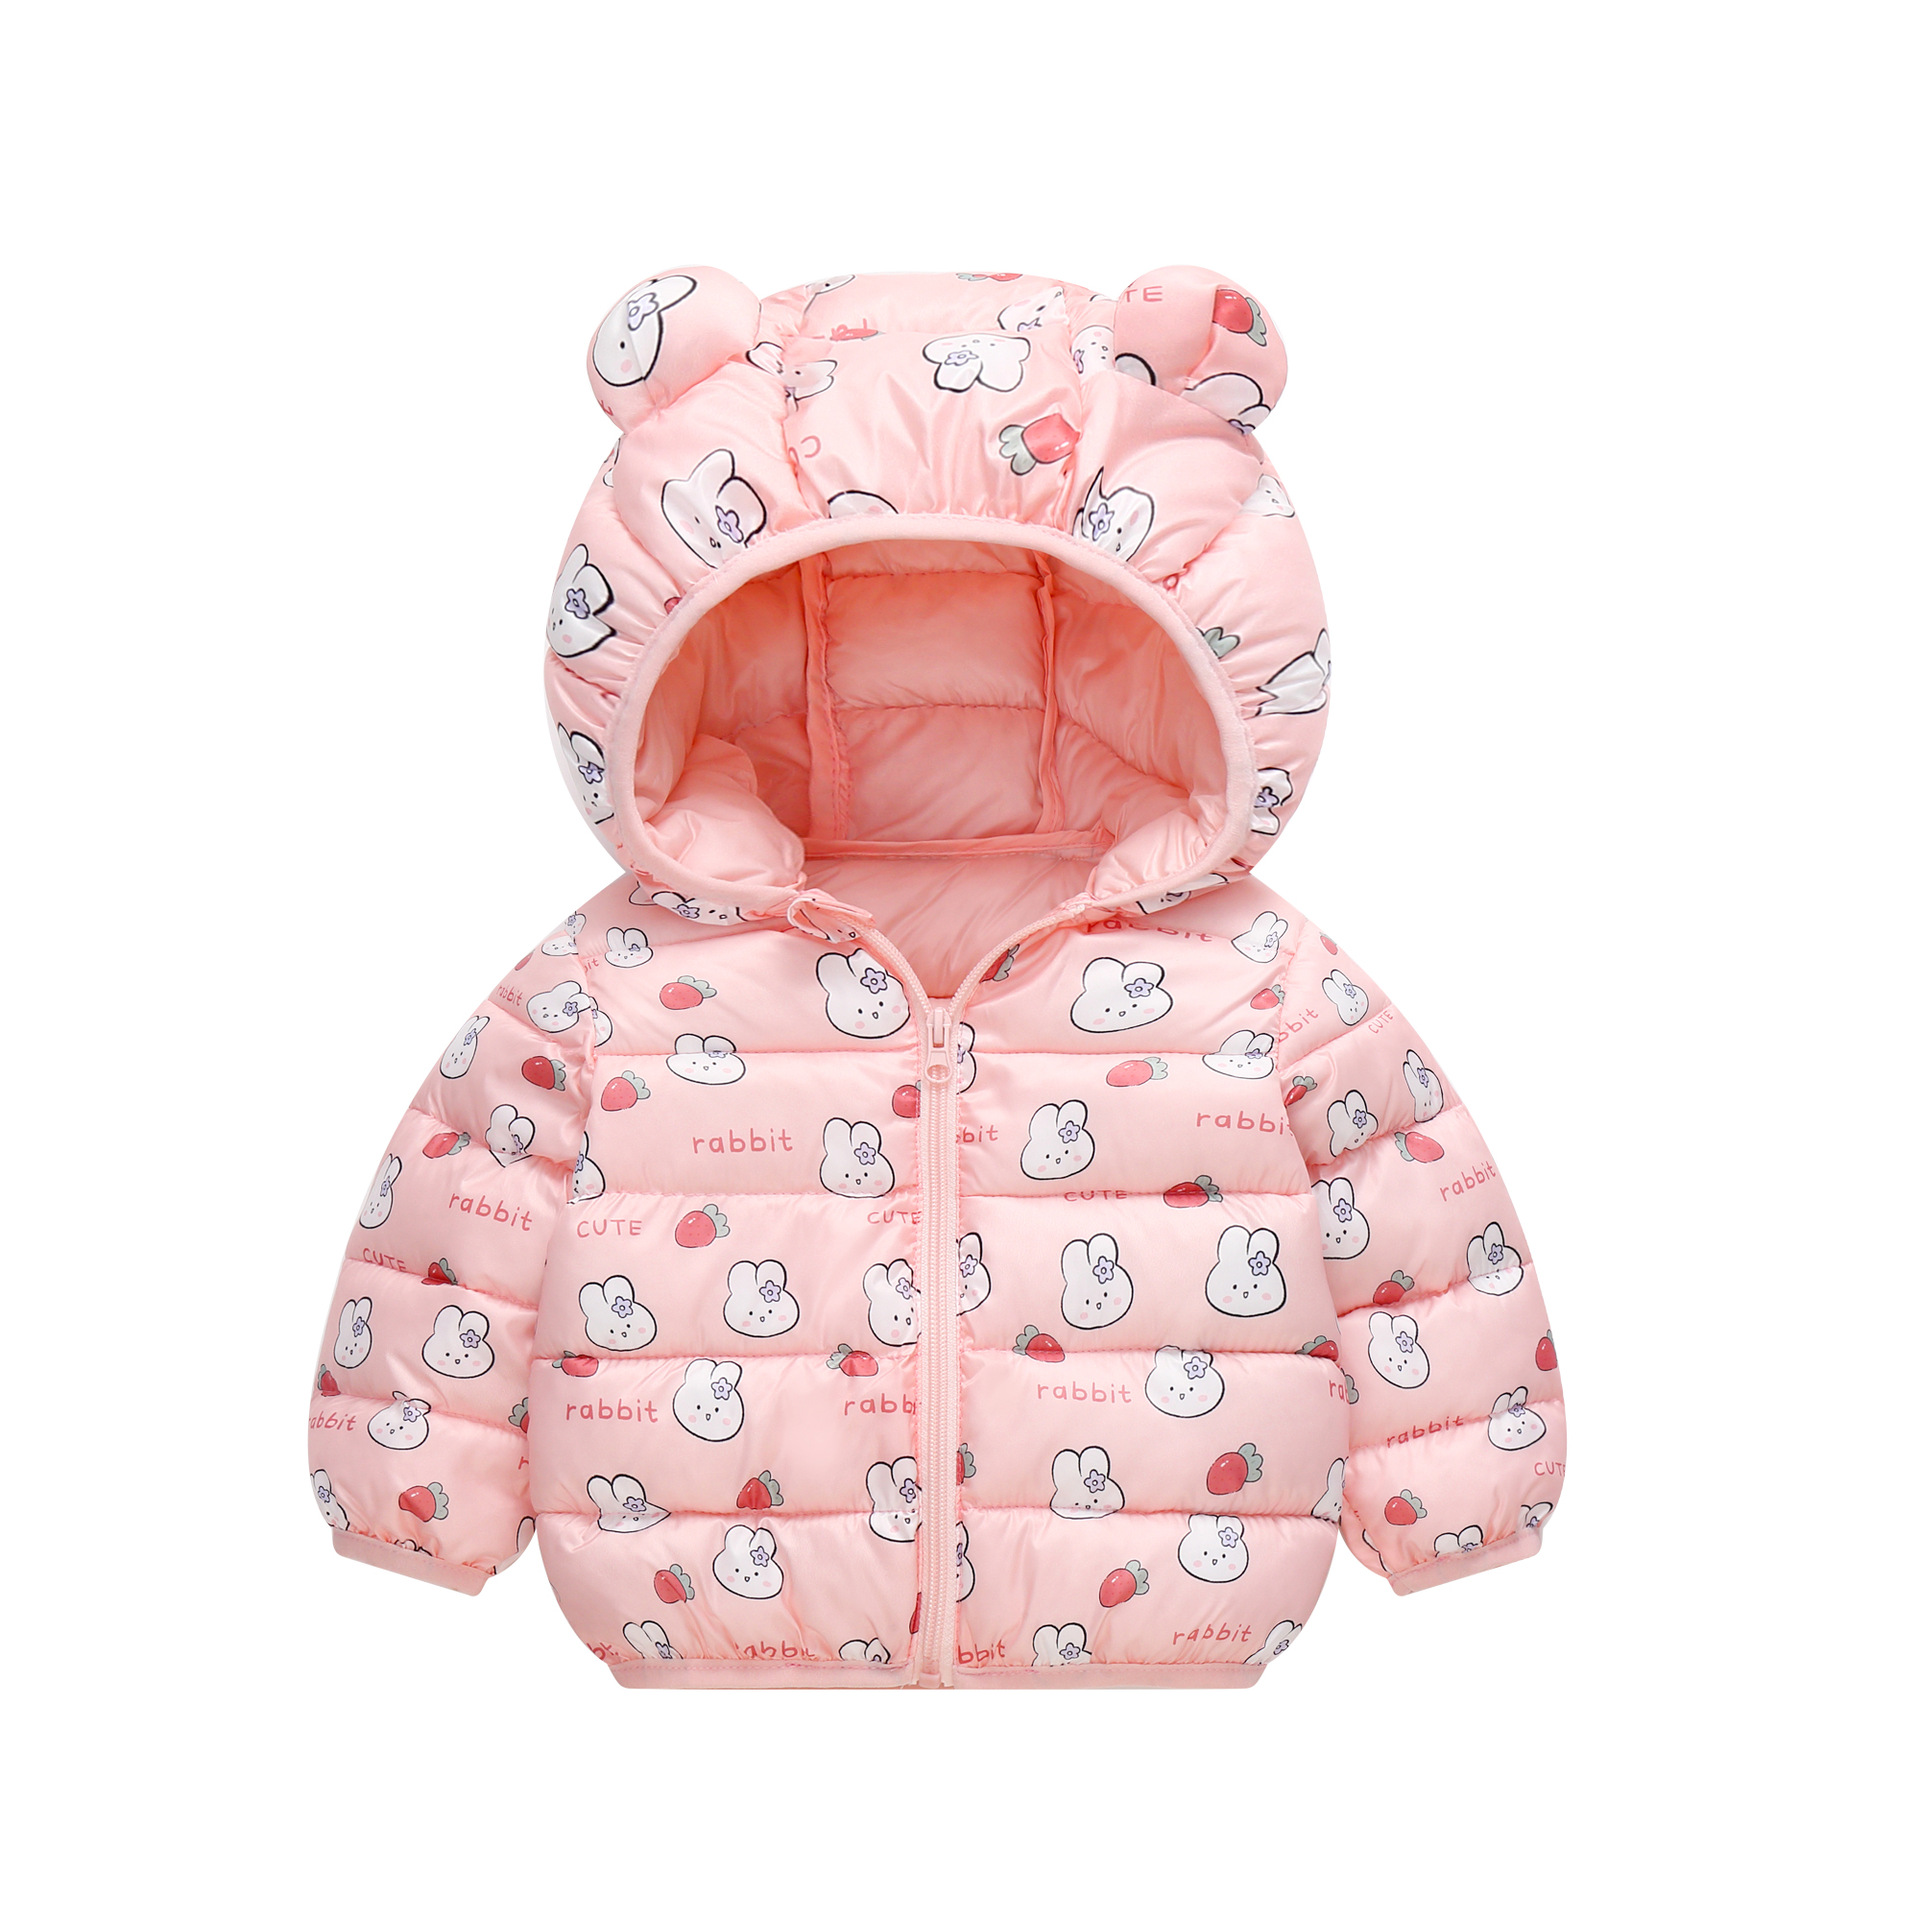 Foreign Trade Children's Wear Spring, Autumn and Winter New Cartoon Children's down and Wadded Jacket Children's Cotton-Padded Clothes for Boys and Girls Cartoon Coat